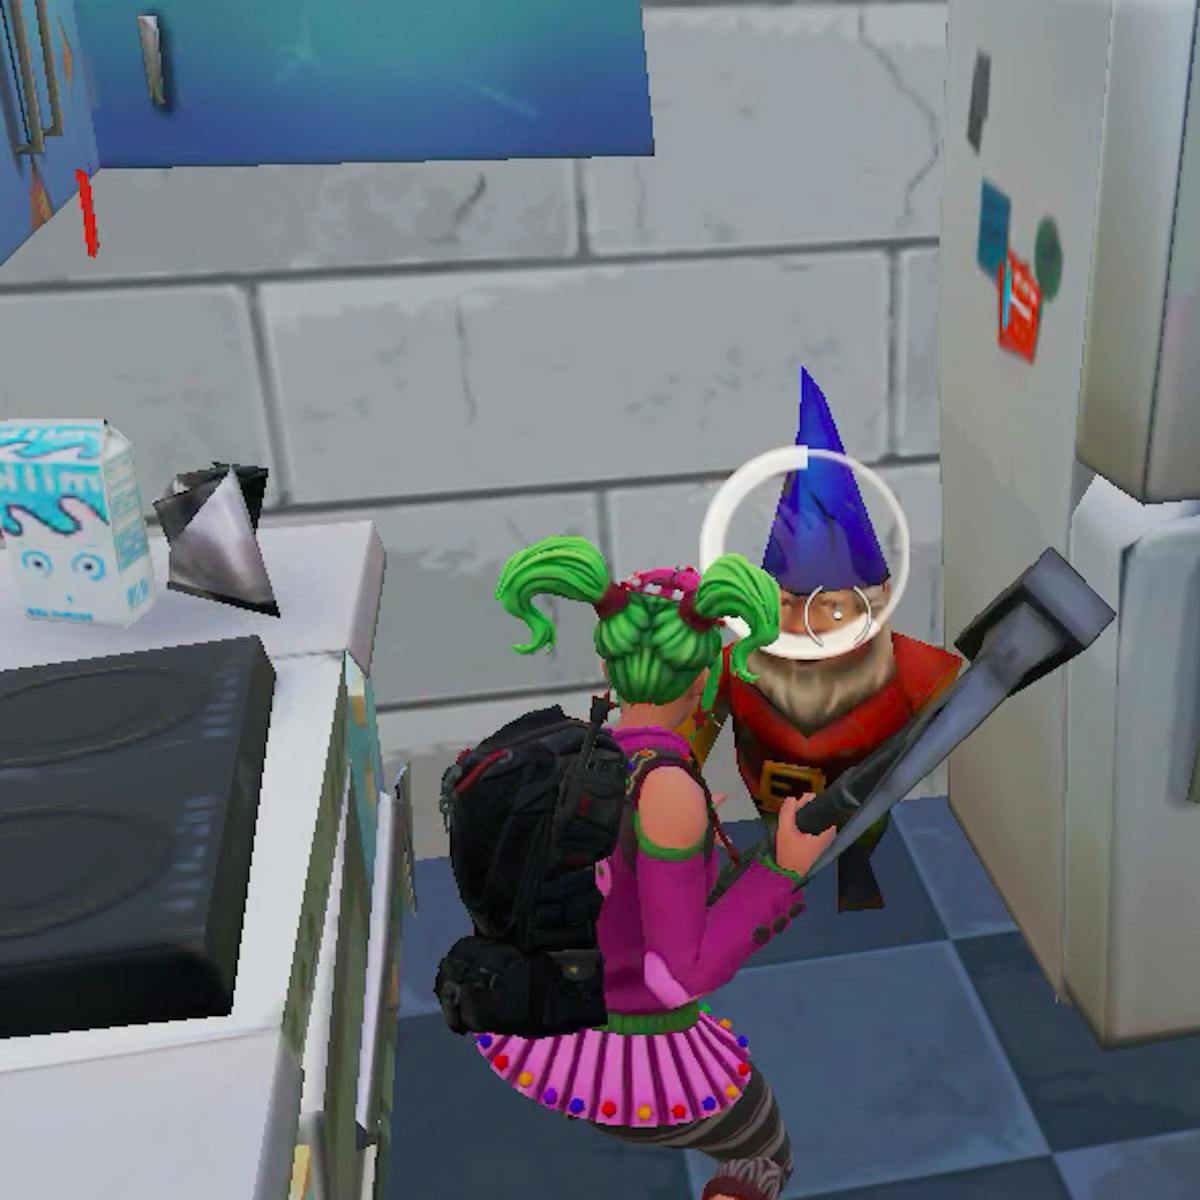 fortnite gnomes locations map where to find 7 hungry gnomes in week 8 inverse - fortnite week 8 search hungry gnomes